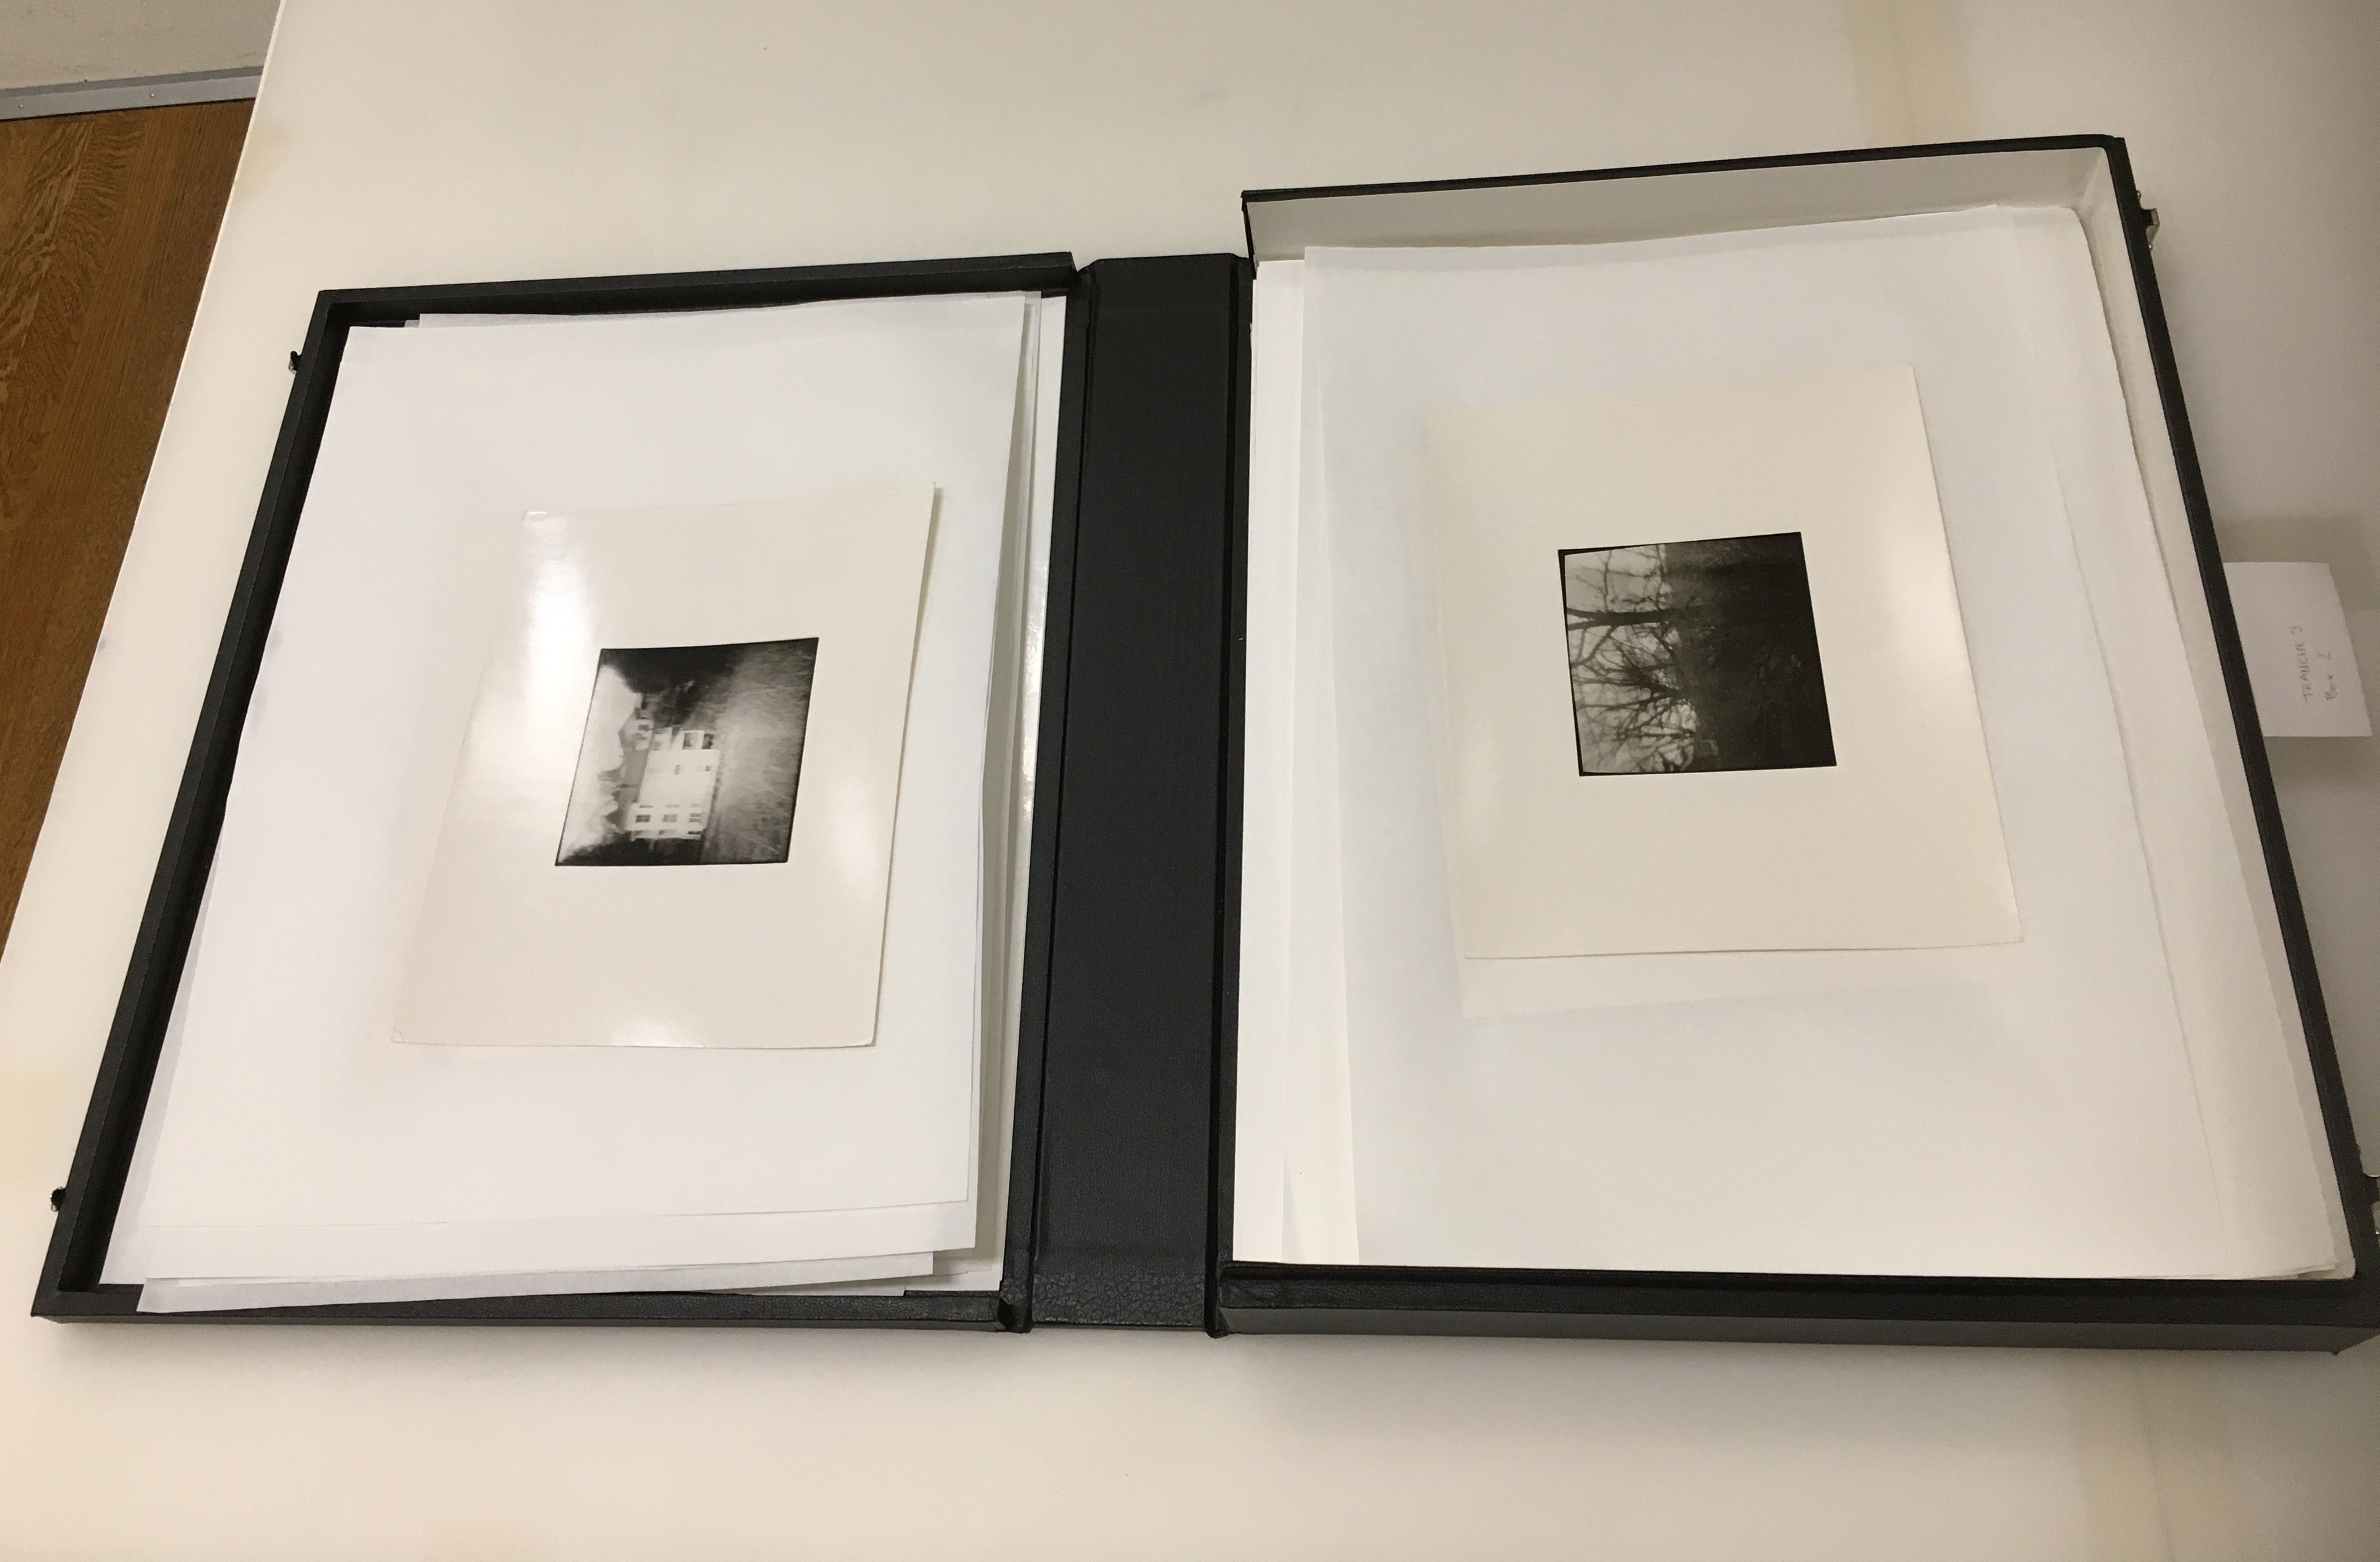 Pair of Matted Photo Prints by Nancy Adam